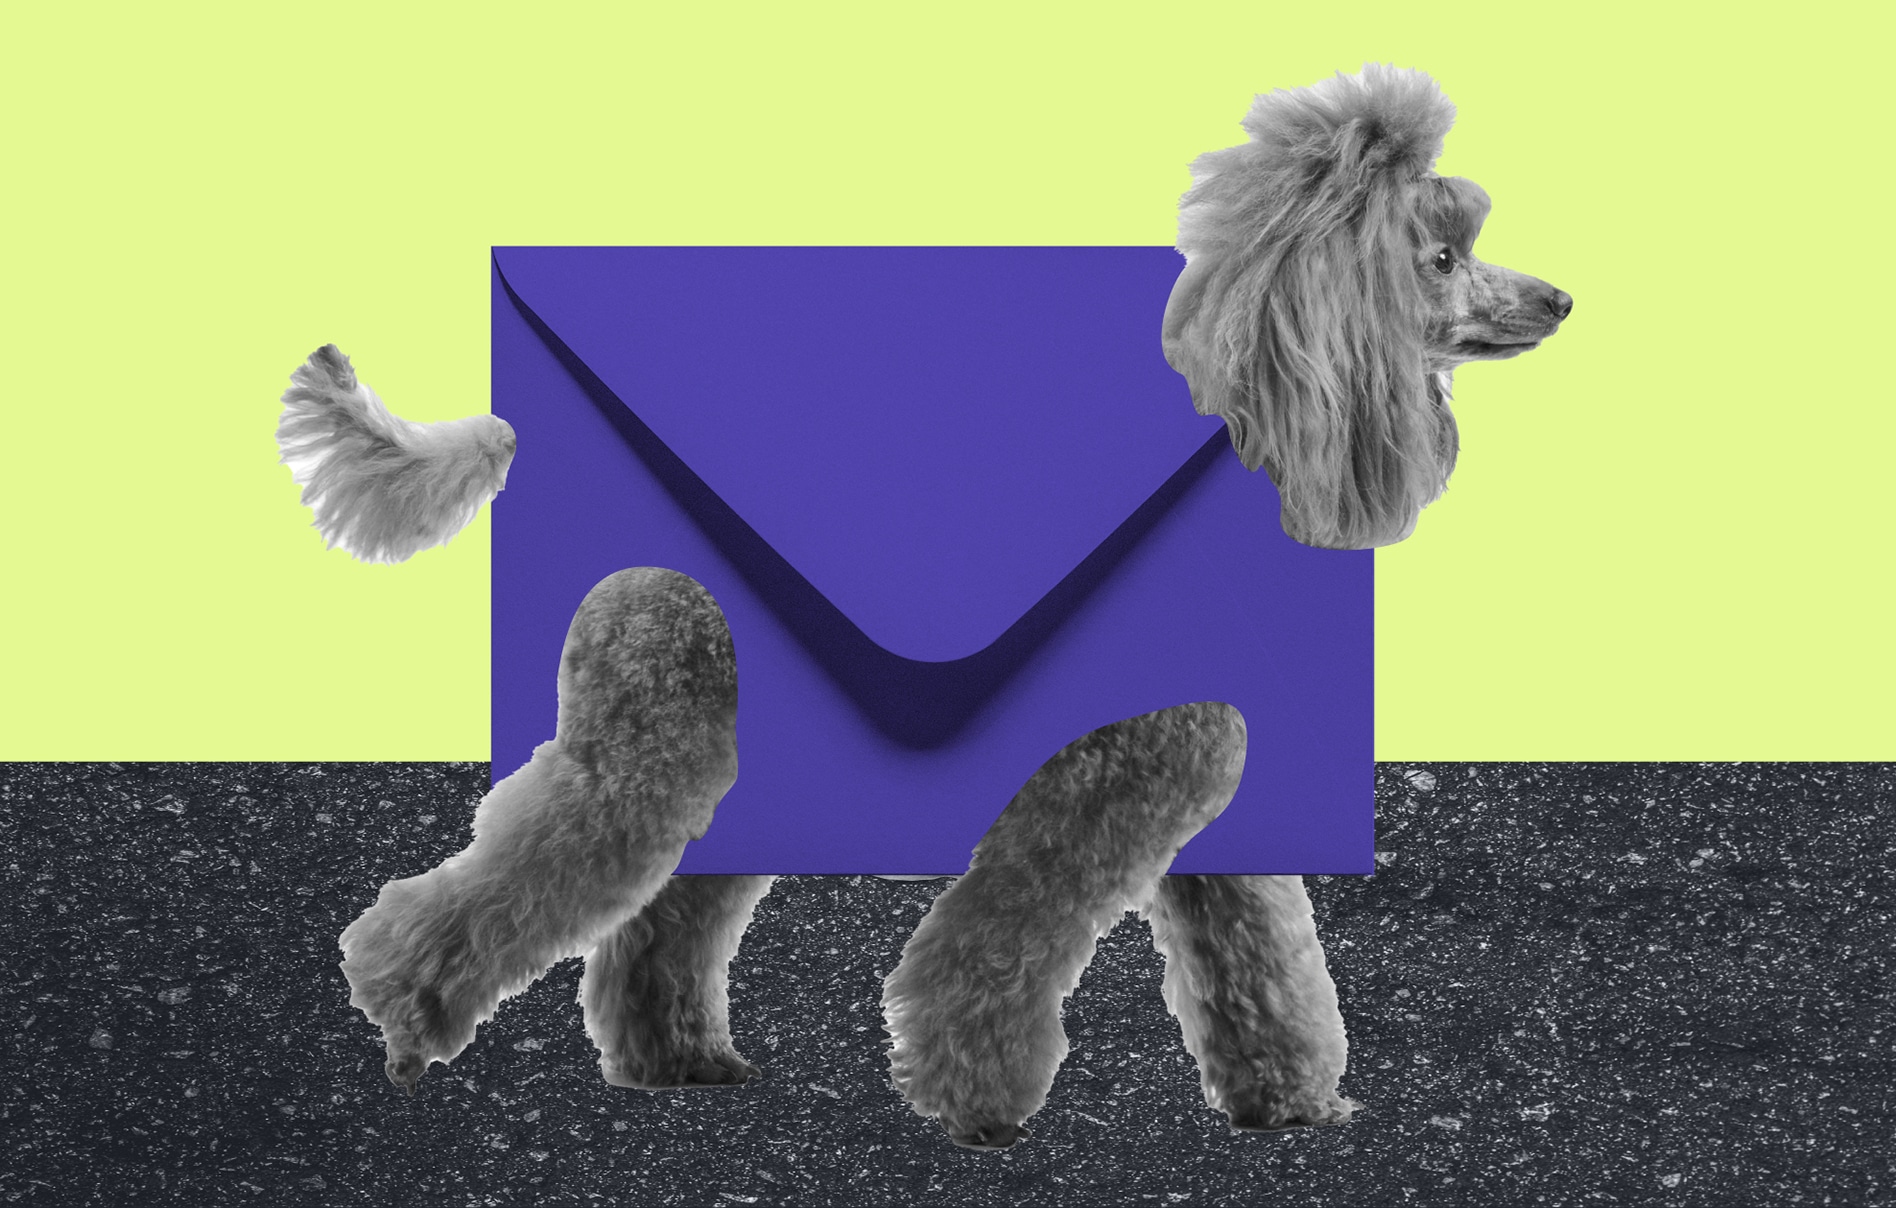 Image of a dog with the body of a mailing envelope